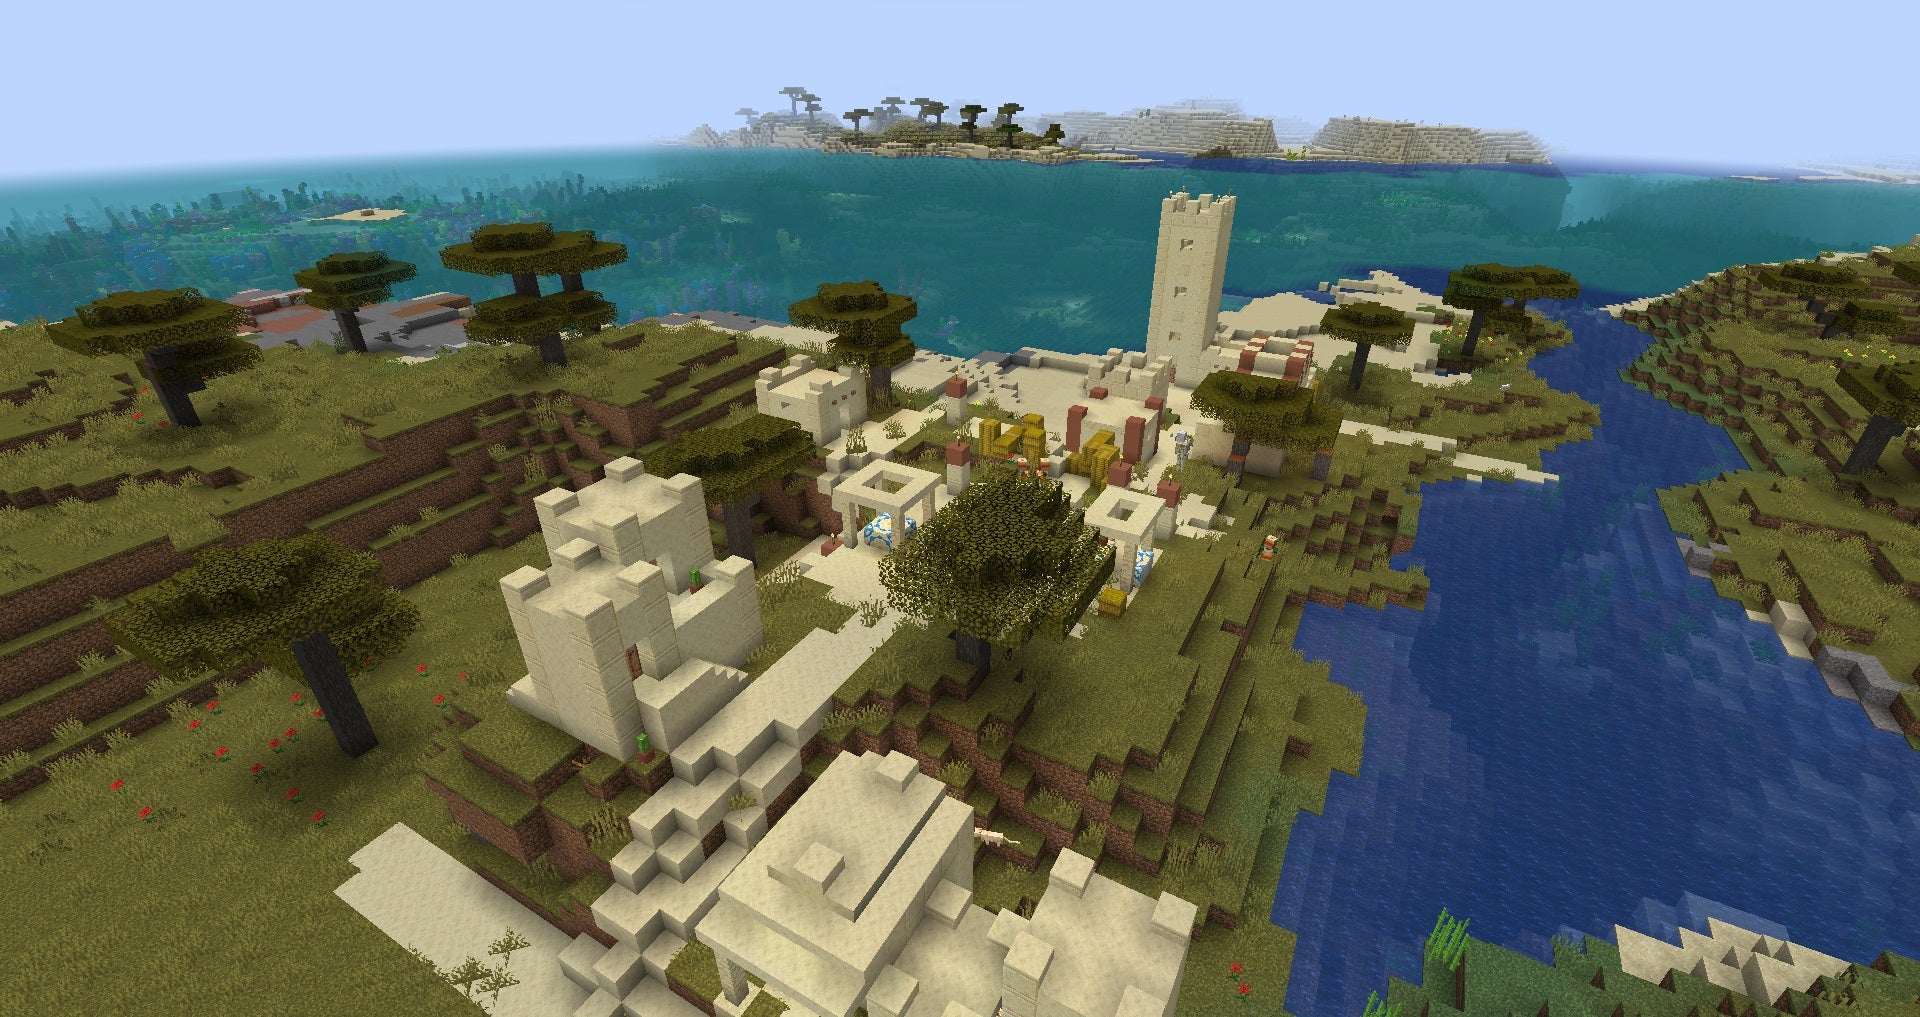 Minecraft experimental snapshot 1.18 - a desert village has spawned in a grassy biome beside the ocean